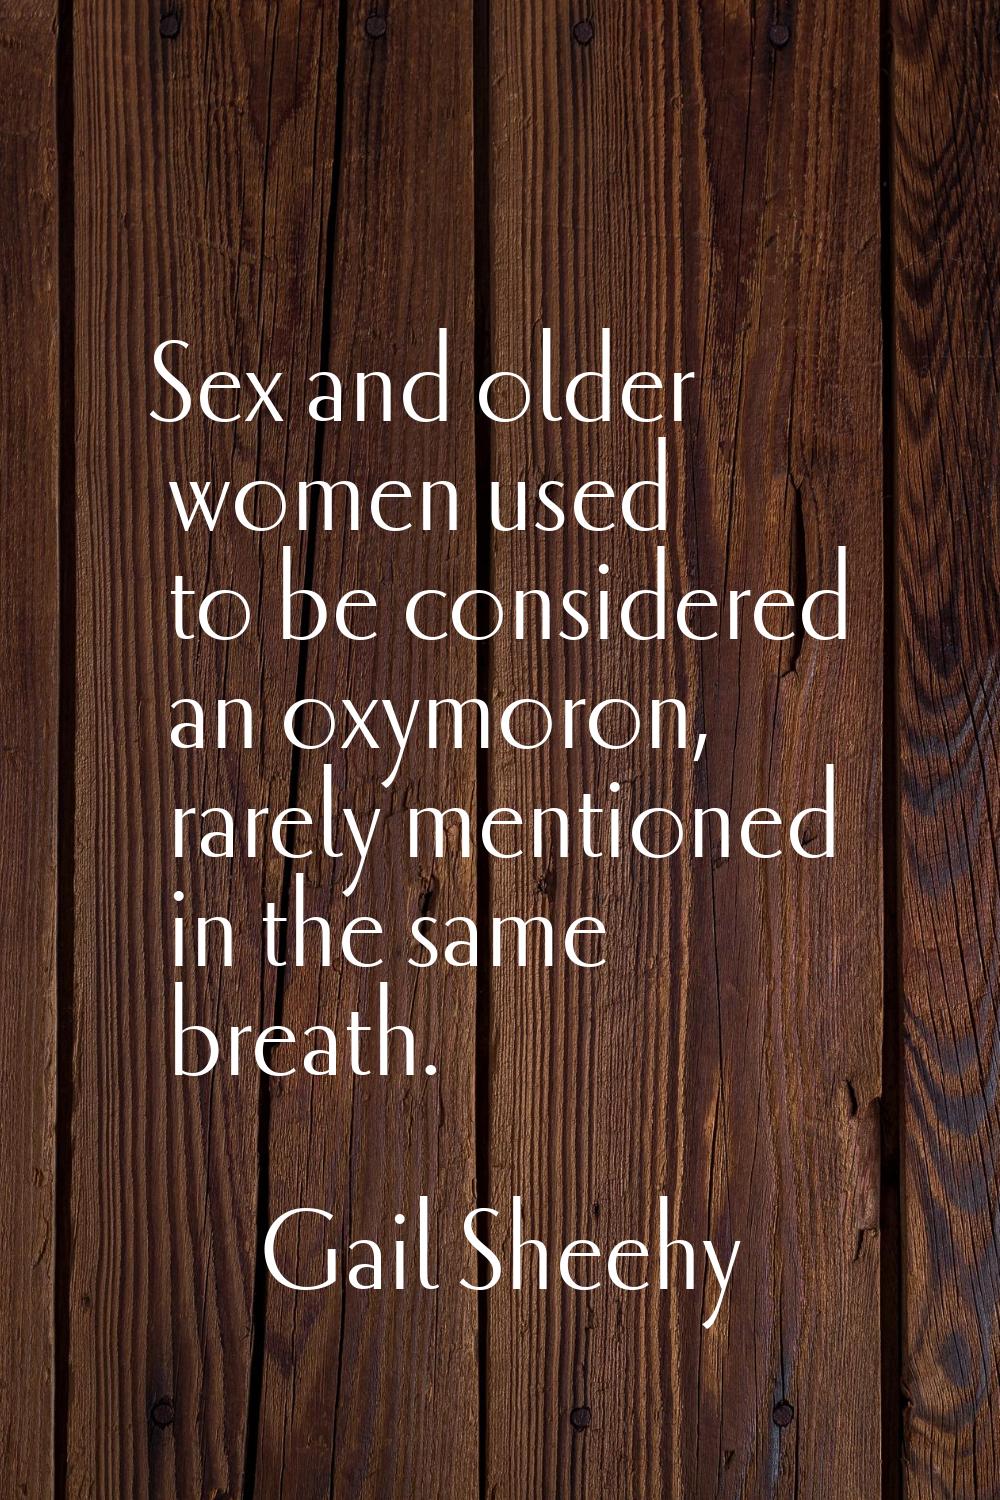 Sex and older women used to be considered an oxymoron, rarely mentioned in the same breath.